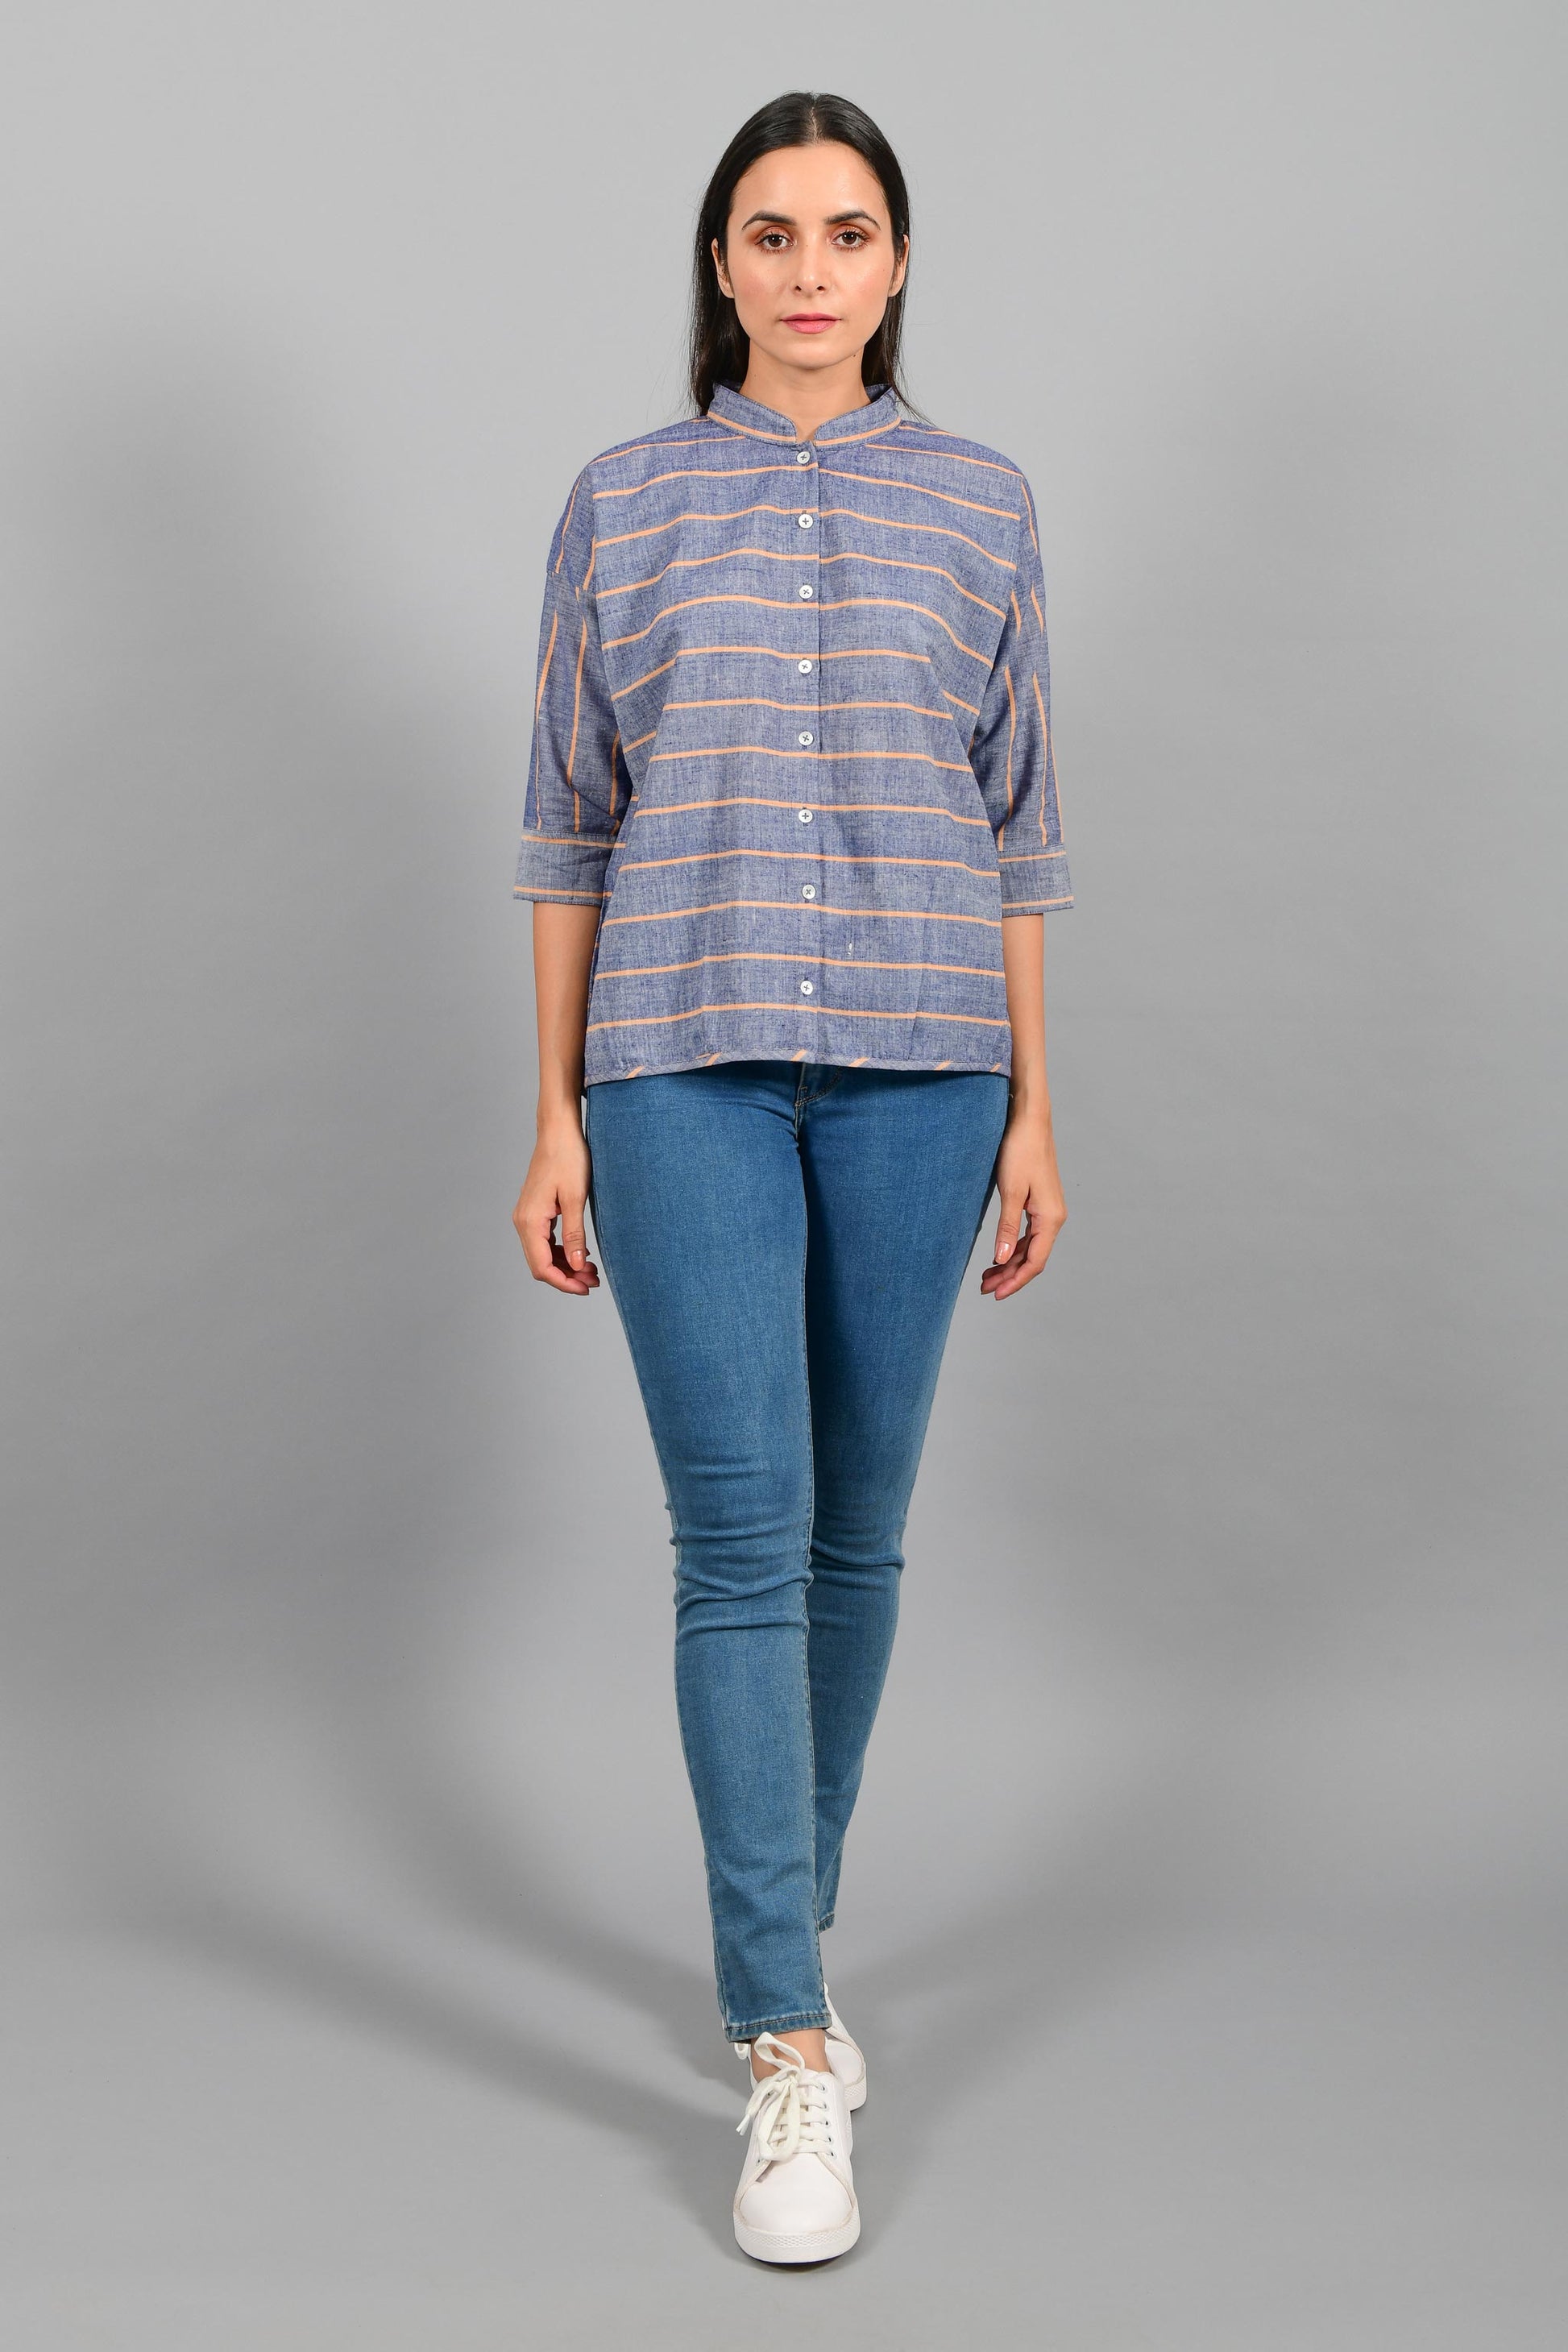 Front pose of an Indian female womenswear fashion model in a blue chambray with orange stripes handspun and handwoven khadi cotton free size top by Cotton Rack.